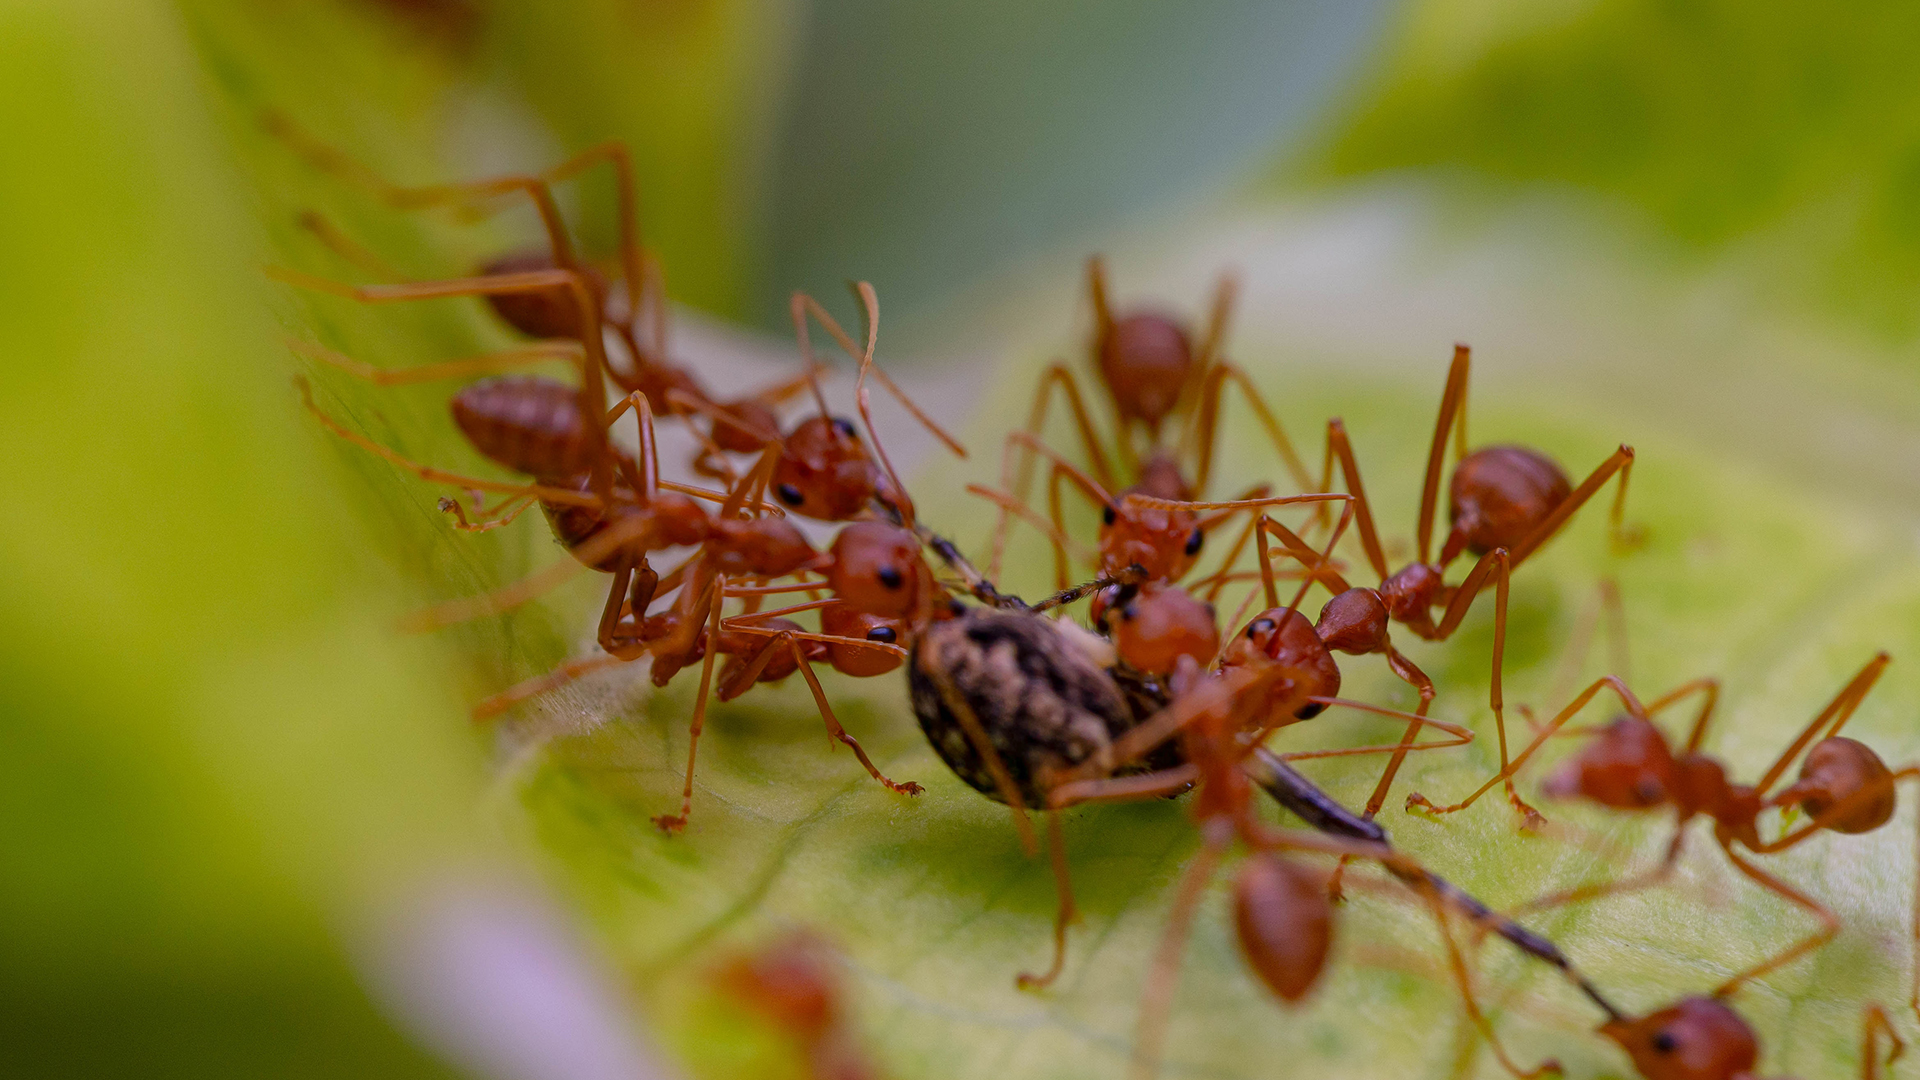 Fire ants fighting over food